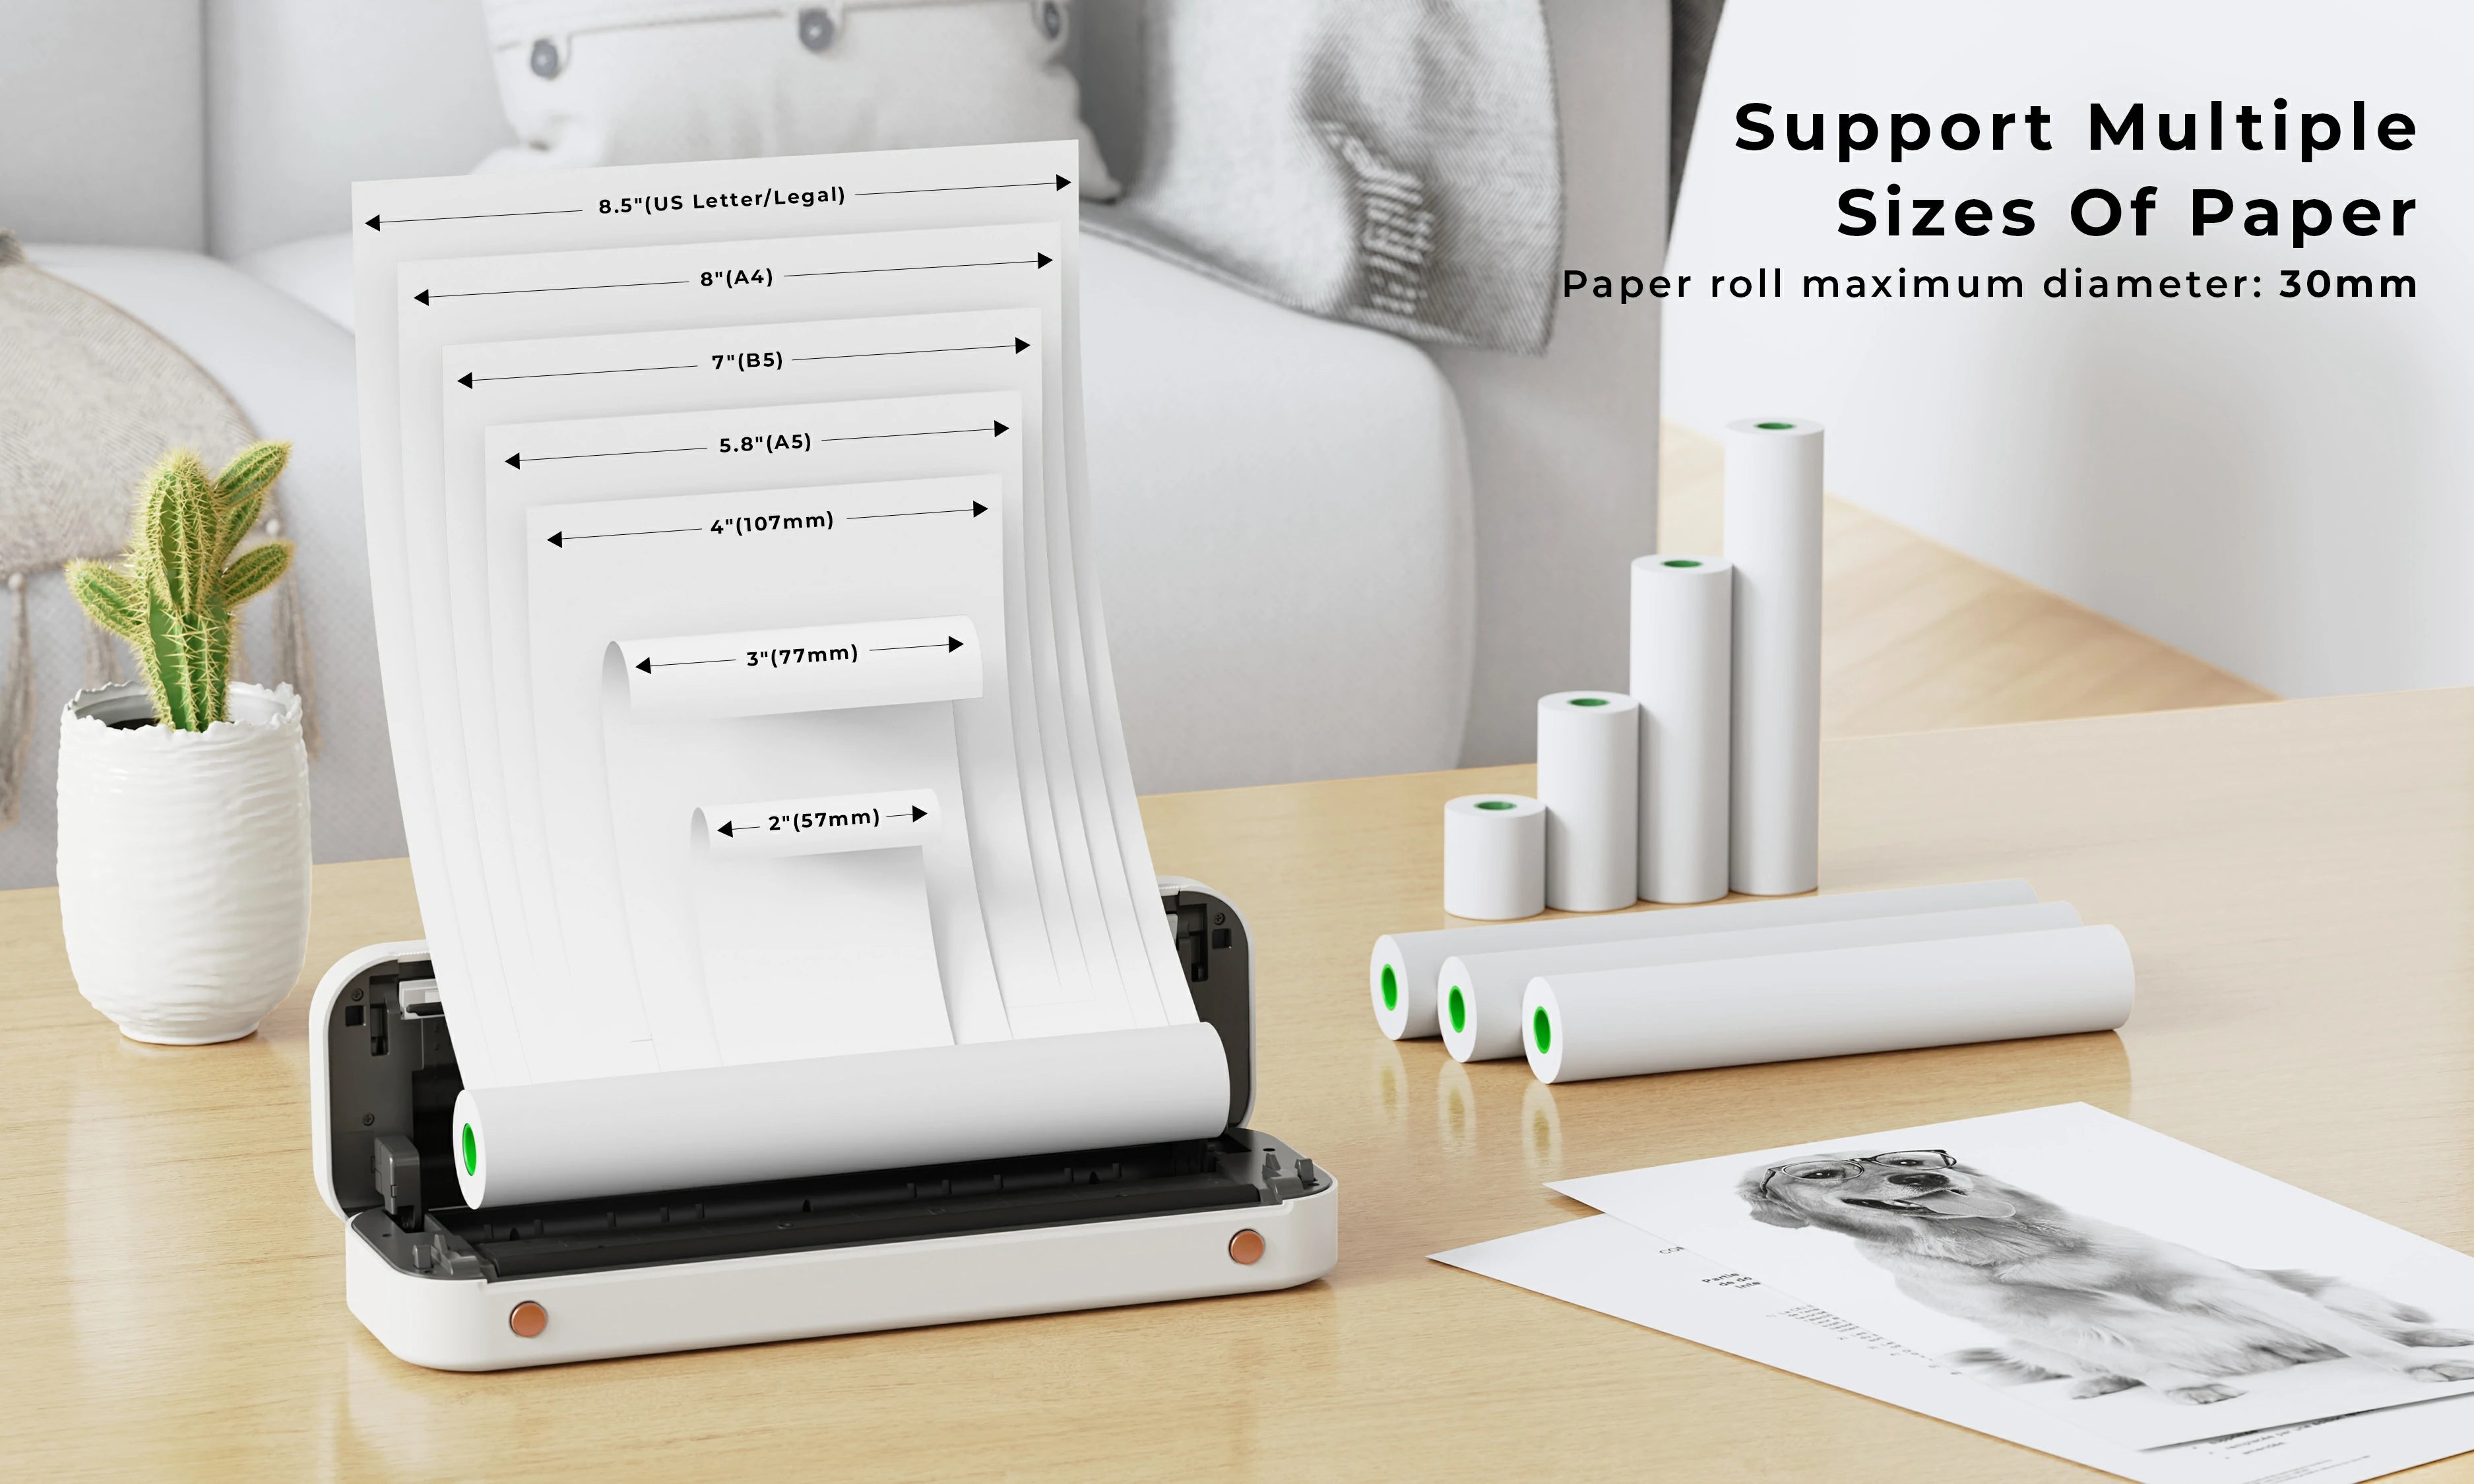 The portable printer supports various paper sizes, from 58 mm to 216 mm in width.